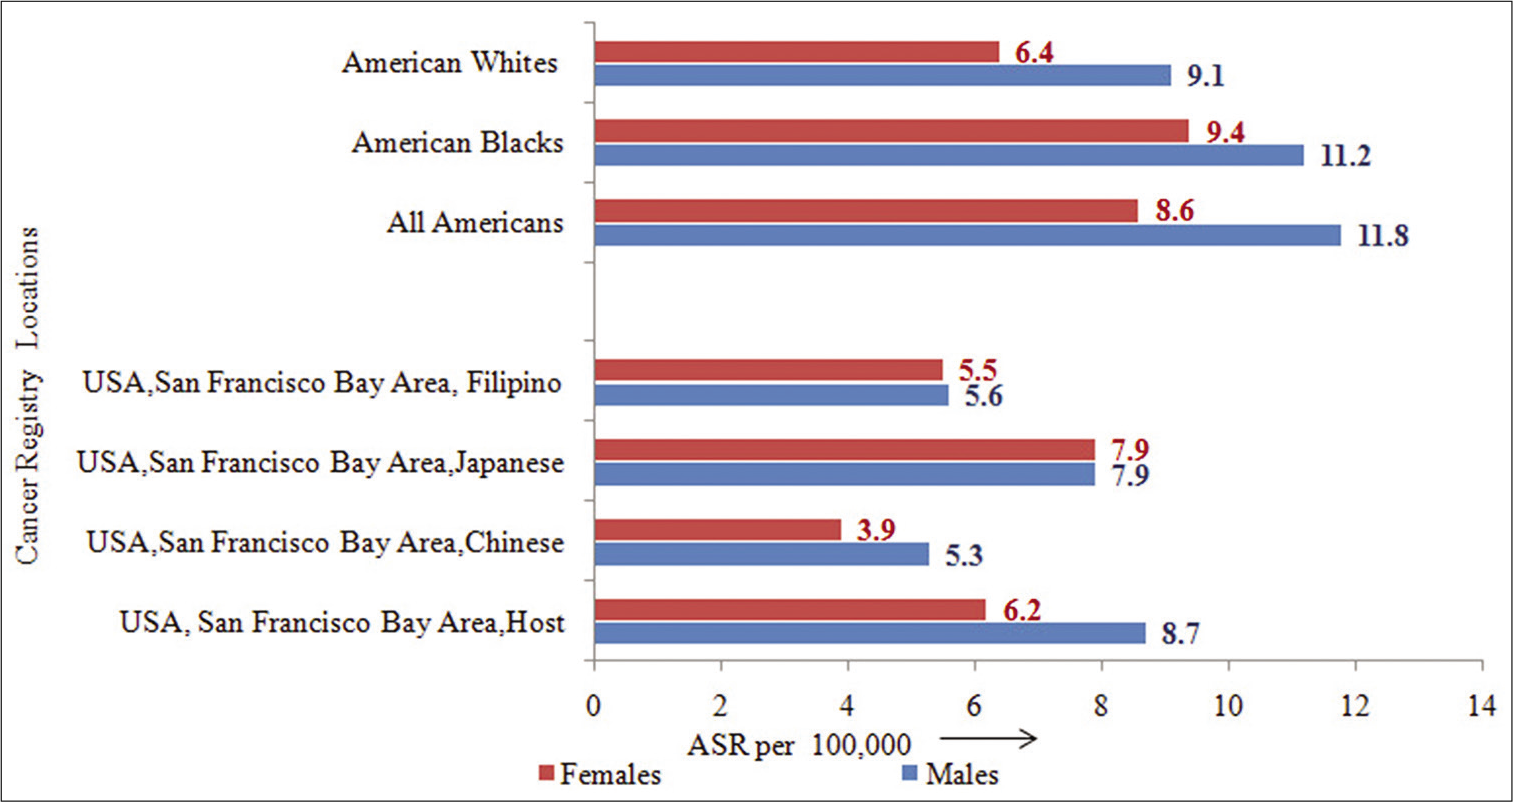 Incidence rates (ASR) by racial origin and migration status.